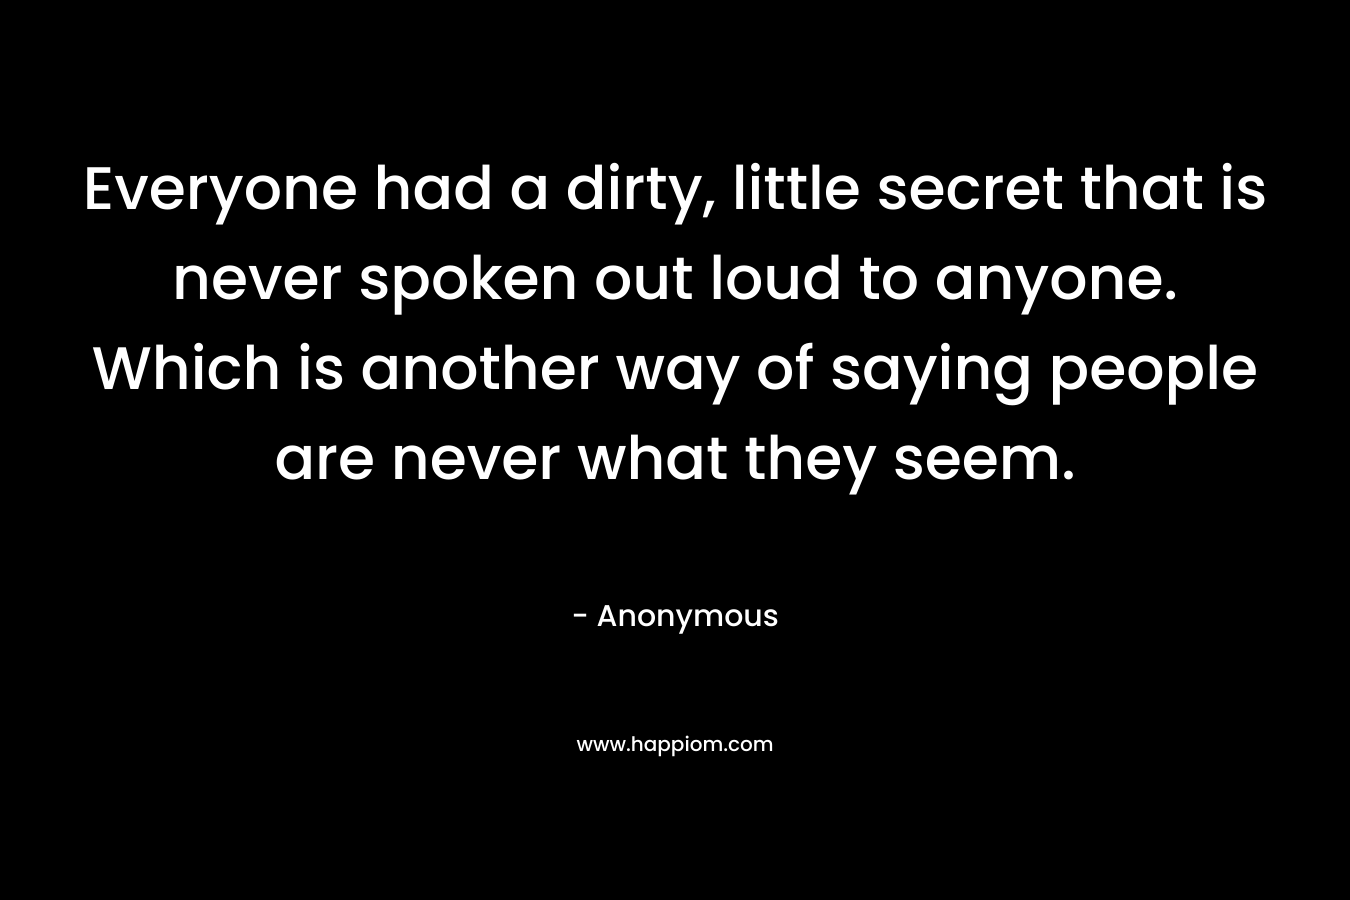 Everyone had a dirty, little secret that is never spoken out loud to anyone. Which is another way of saying people are never what they seem. – Anonymous